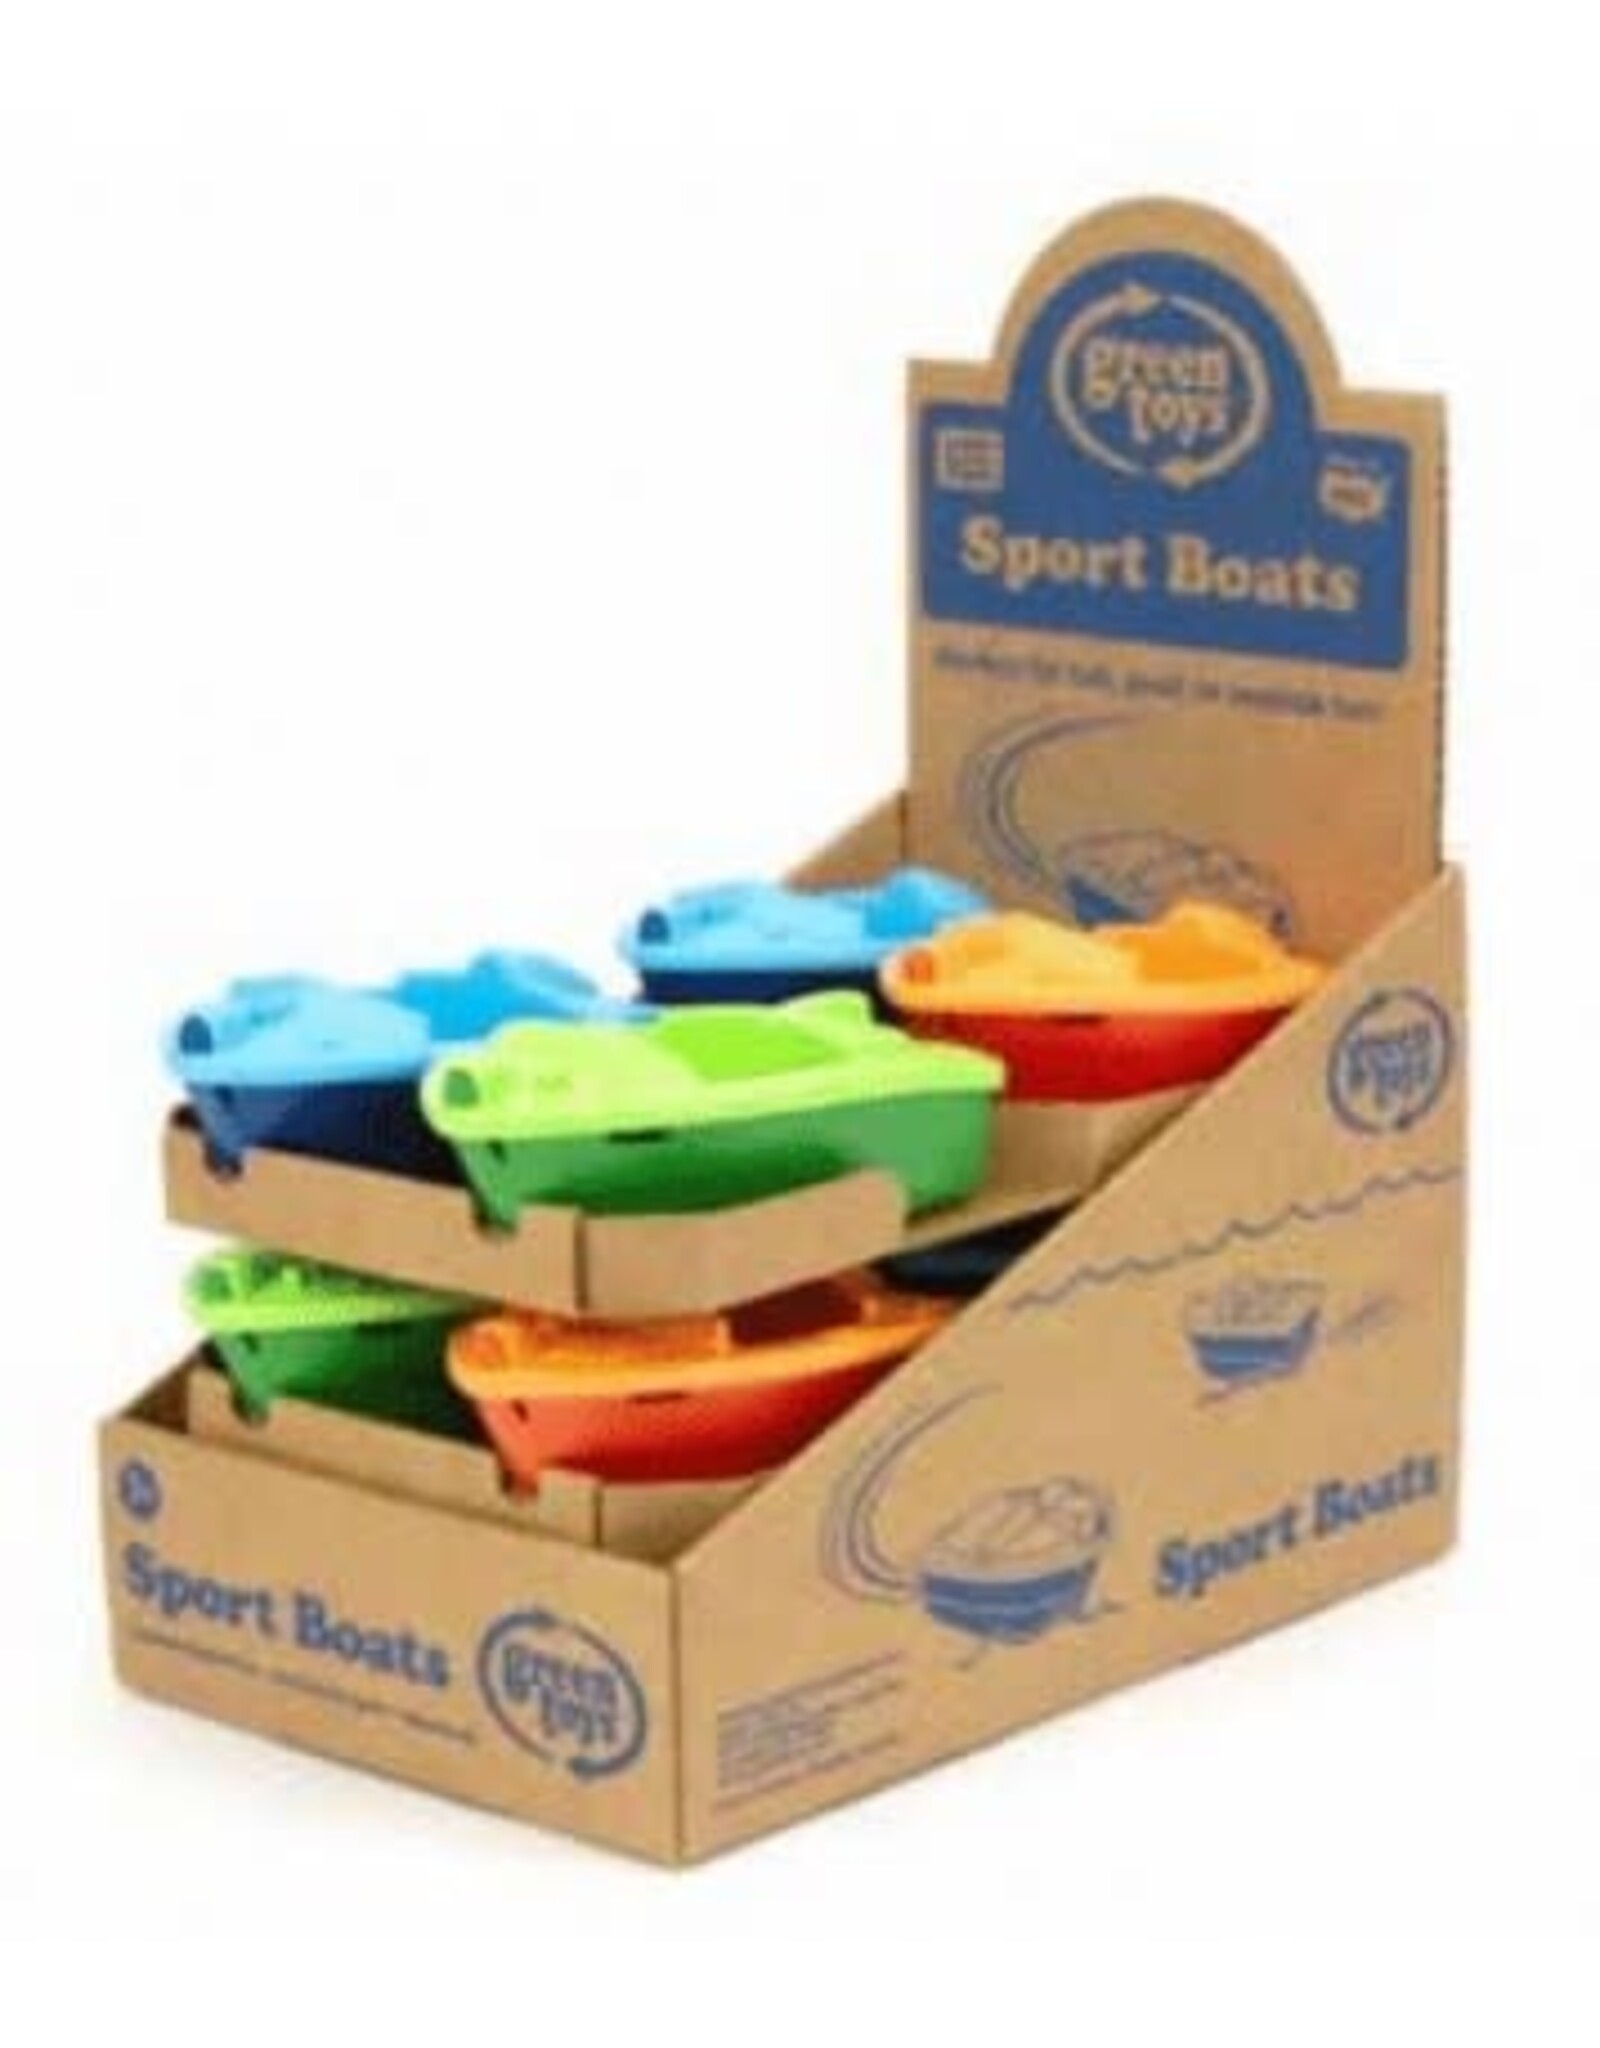 Green Toys Sport Boat - Assorted Colors